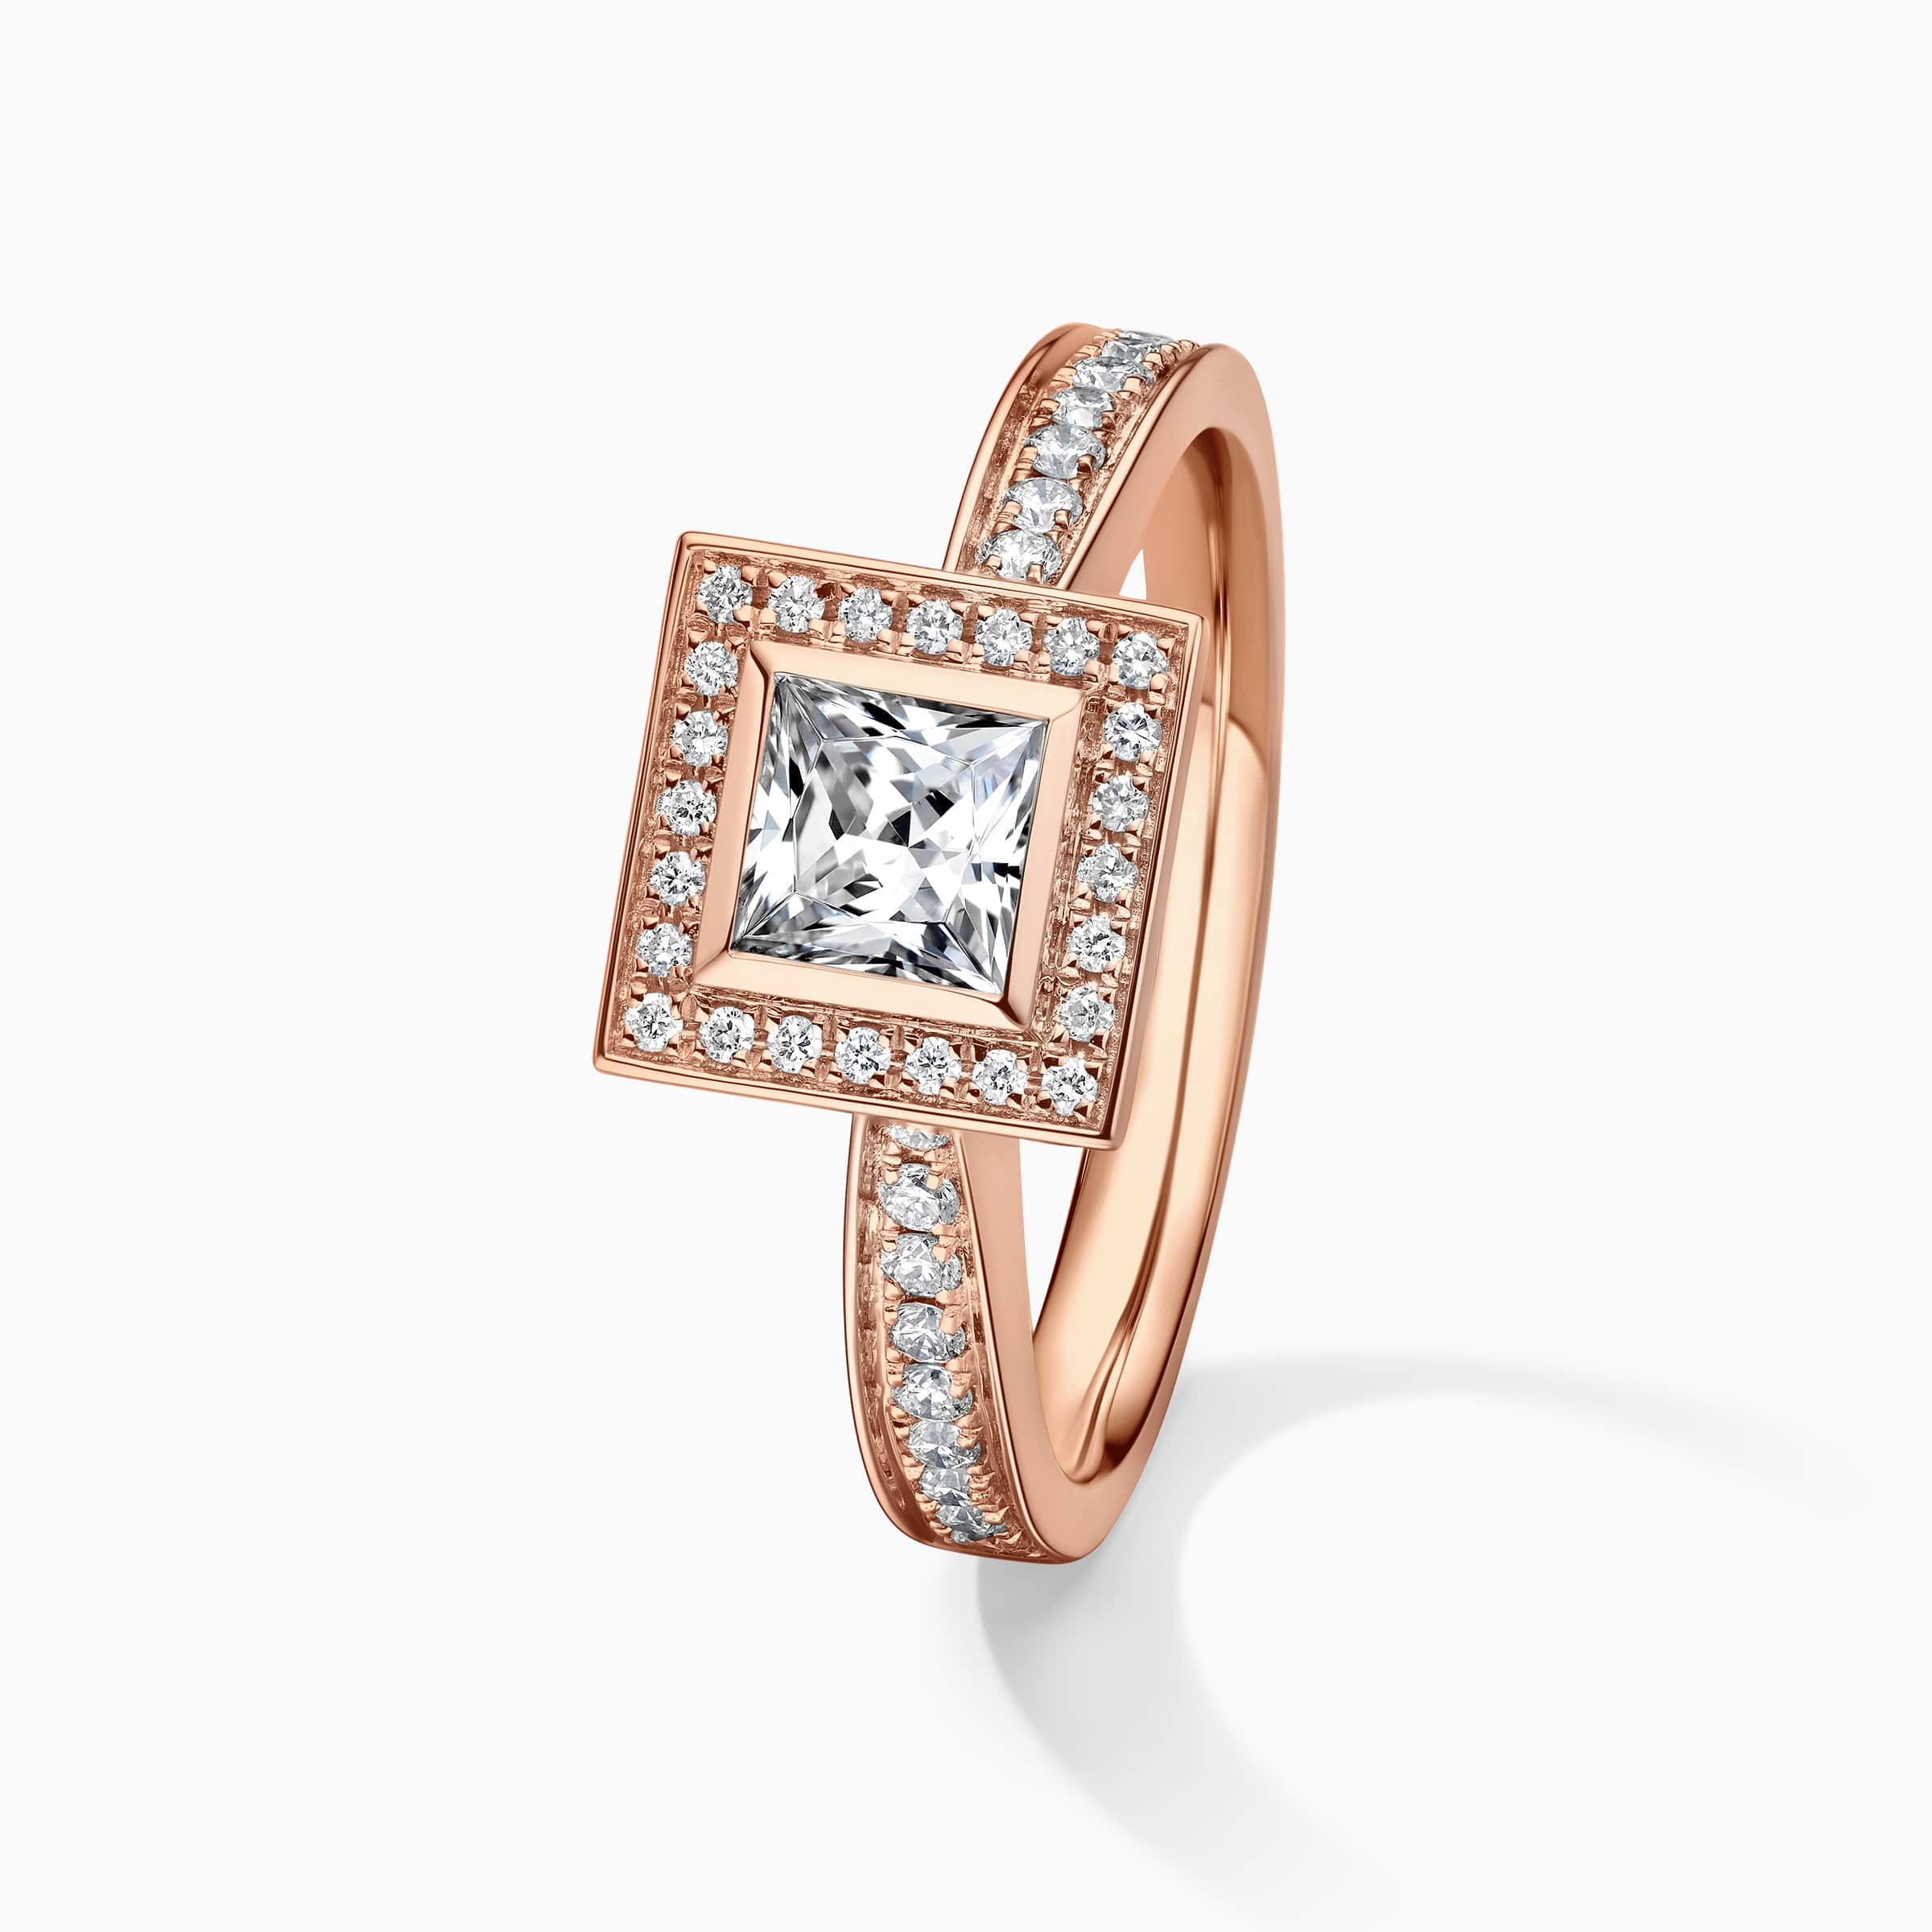 Darry Ring princess cut halo engagement ring in rose gold